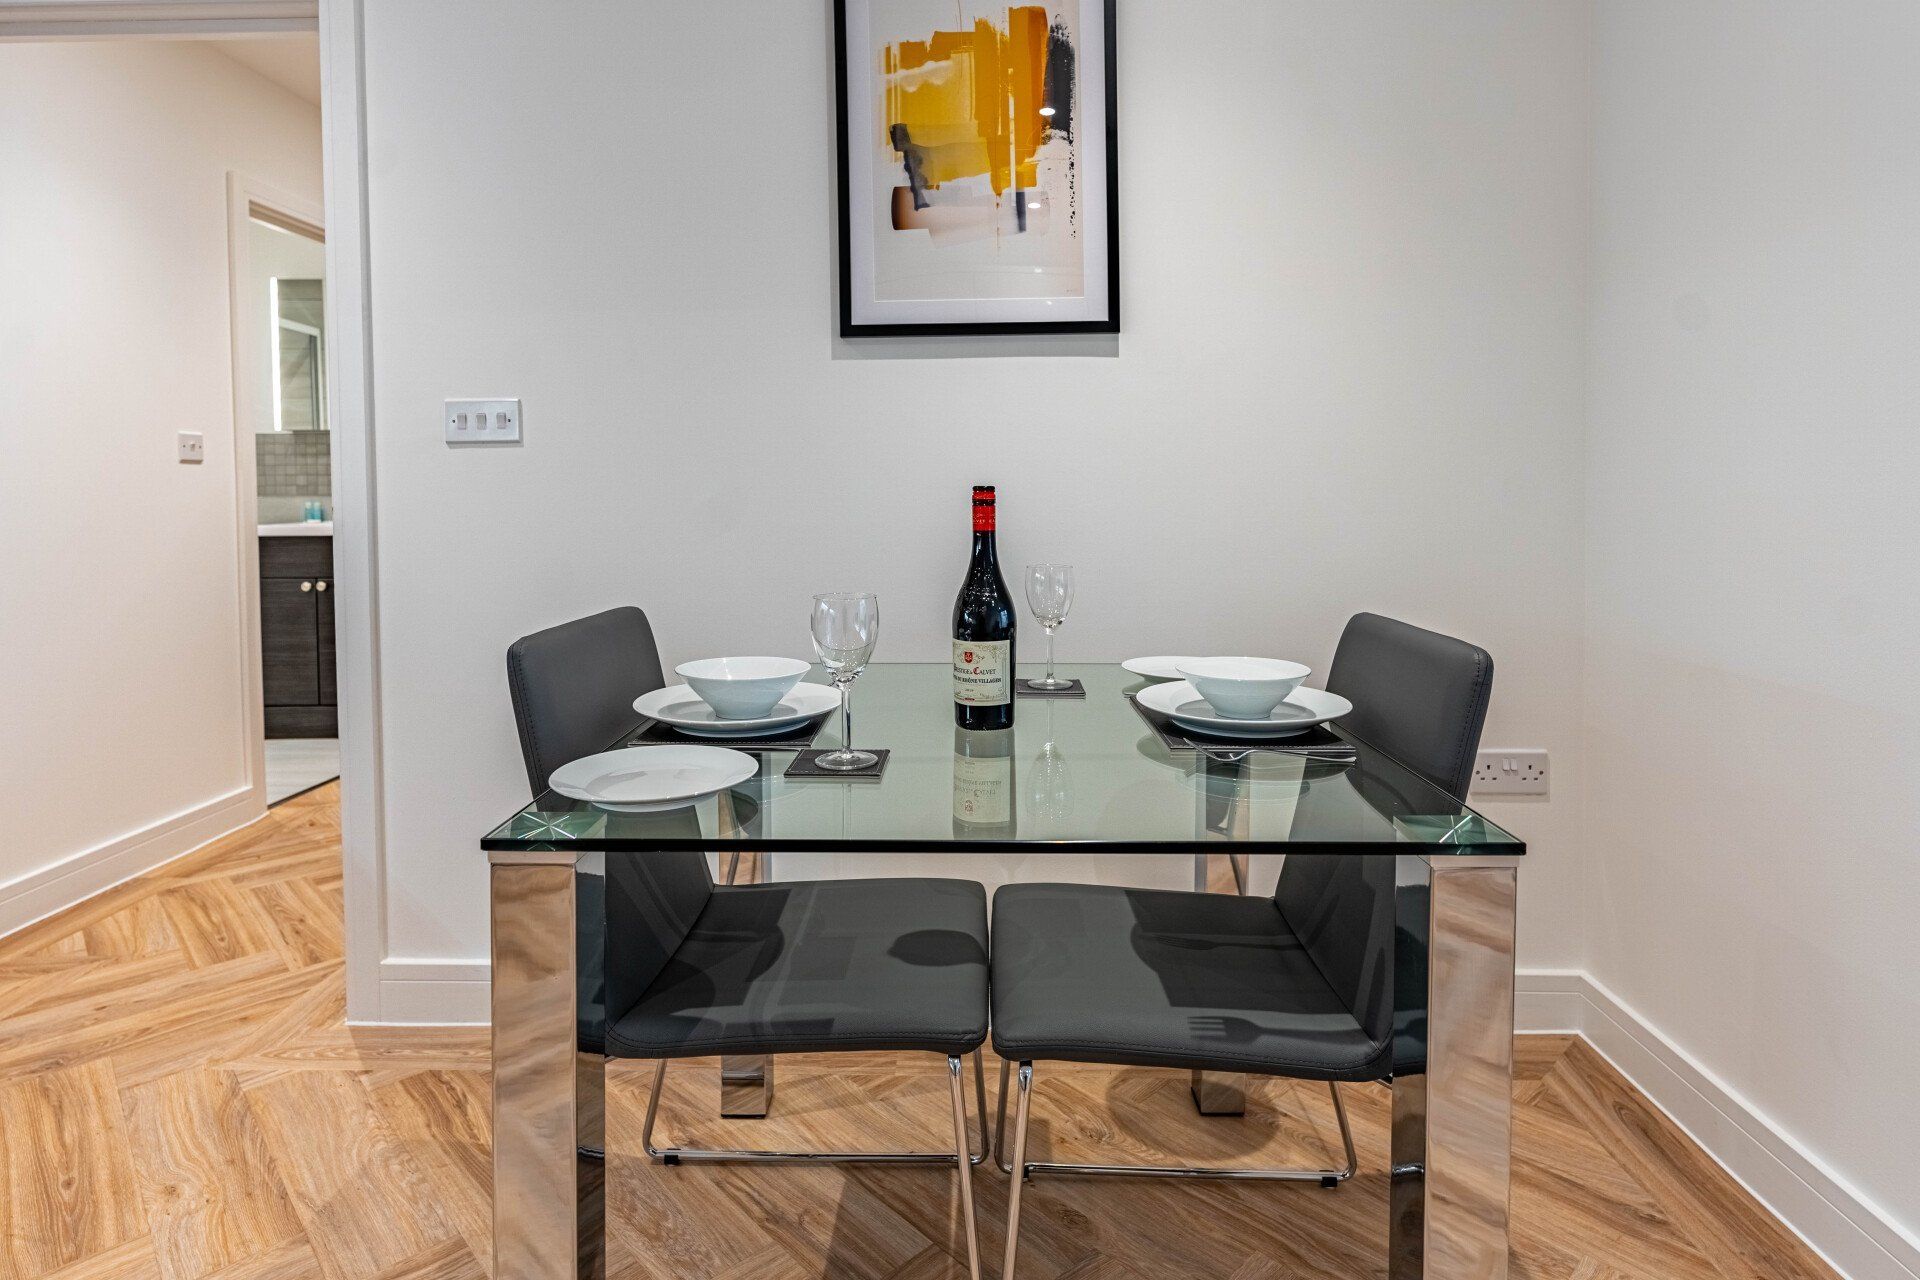 Celador Apartments Bond house, Reading, dining room table and chairs with wine on table for dinner